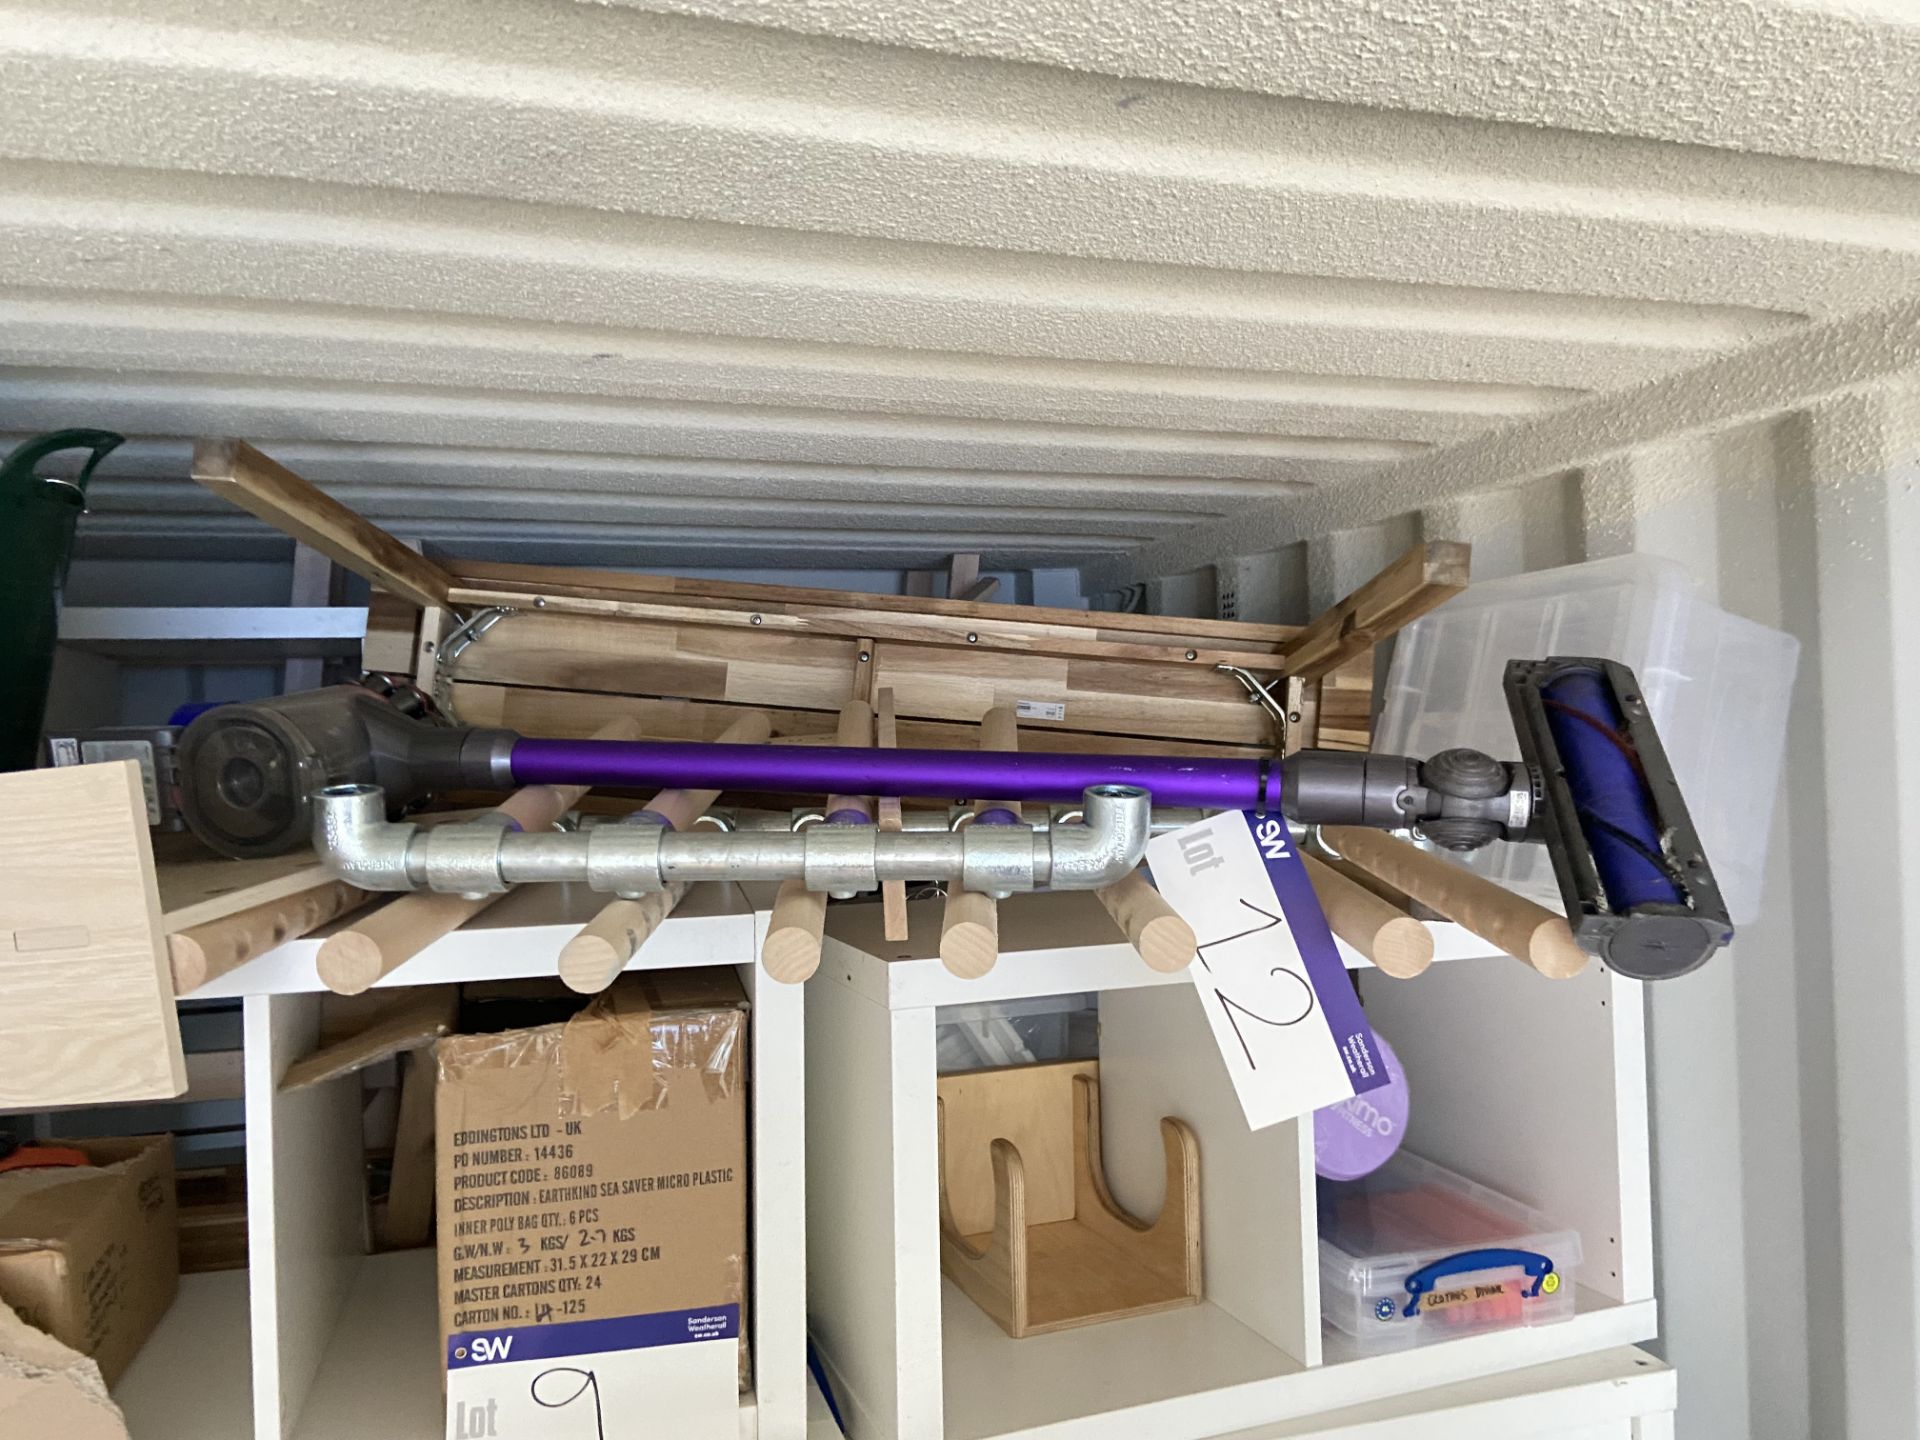 Dyson Cordless Vacuum Cleaner, with Dyson parts and accessories, in cardboard box Please read the